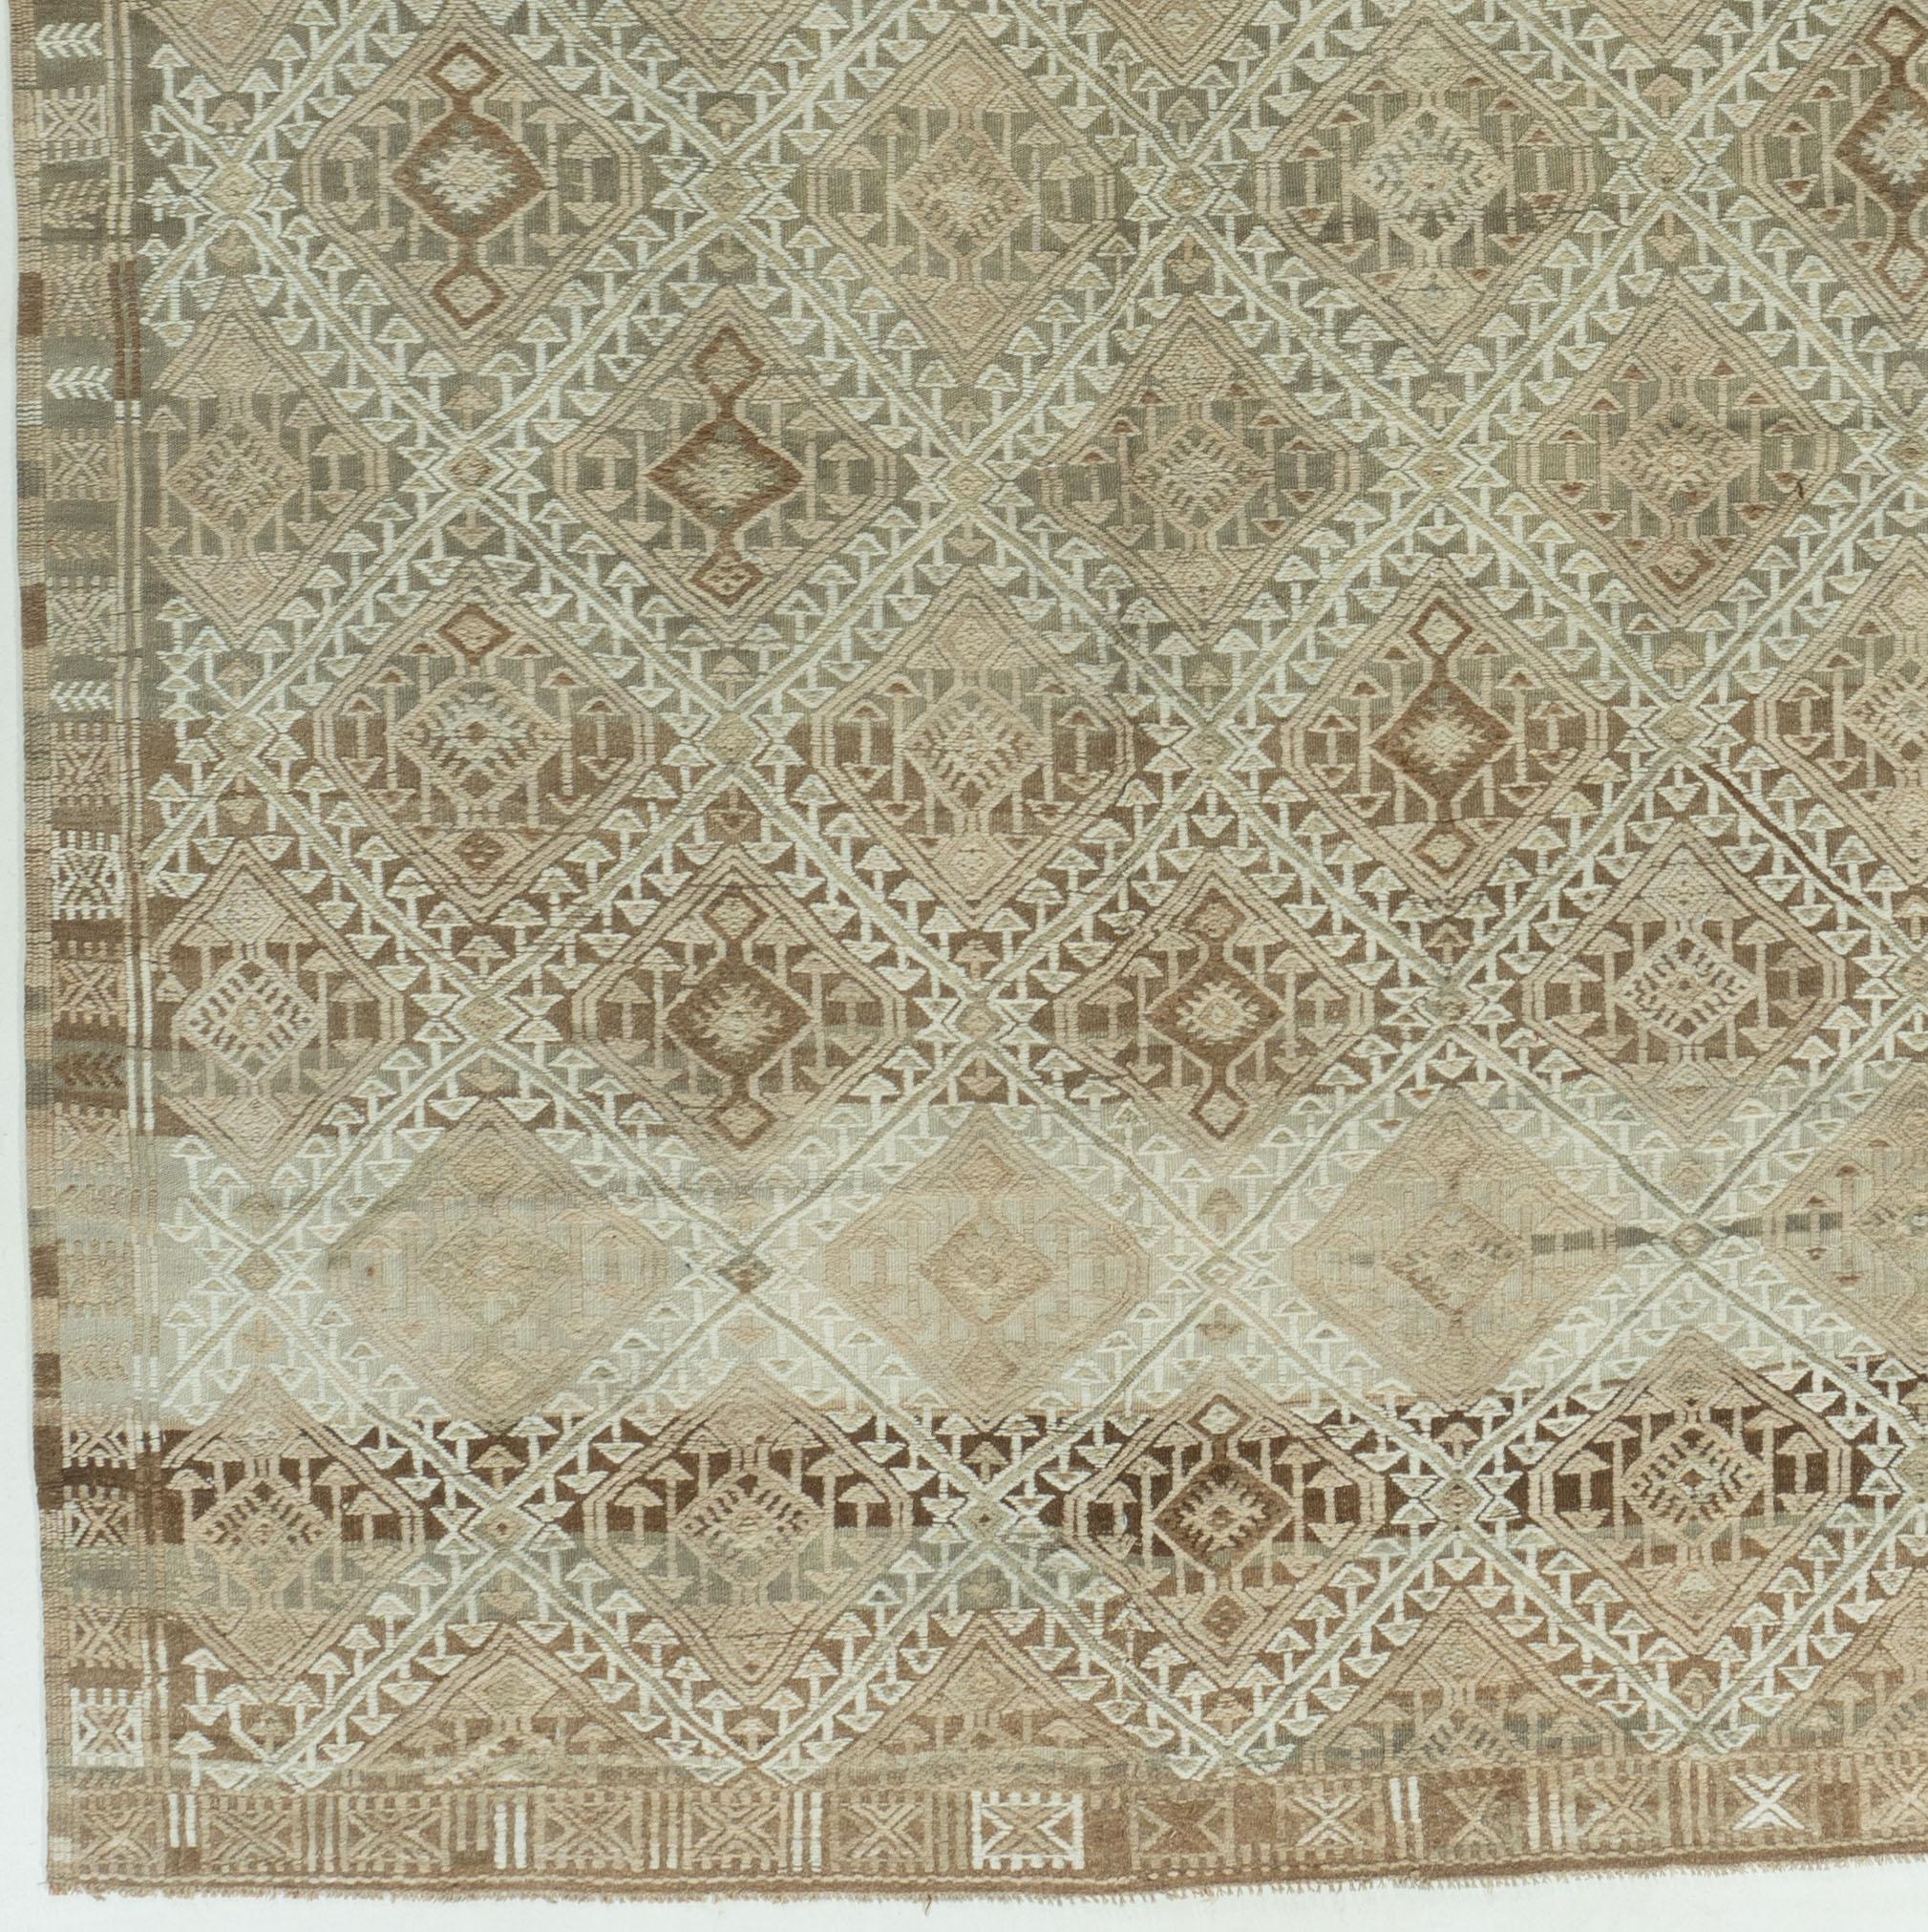 Vintage Turkish Oushak Rug 5'6 X 7'2. Even today, Oushak rugs are still the first choice of professional interior designers. Sometimes this is because when grading Oushak carpets, carpet connoisseurs will not only look at the overall quality of